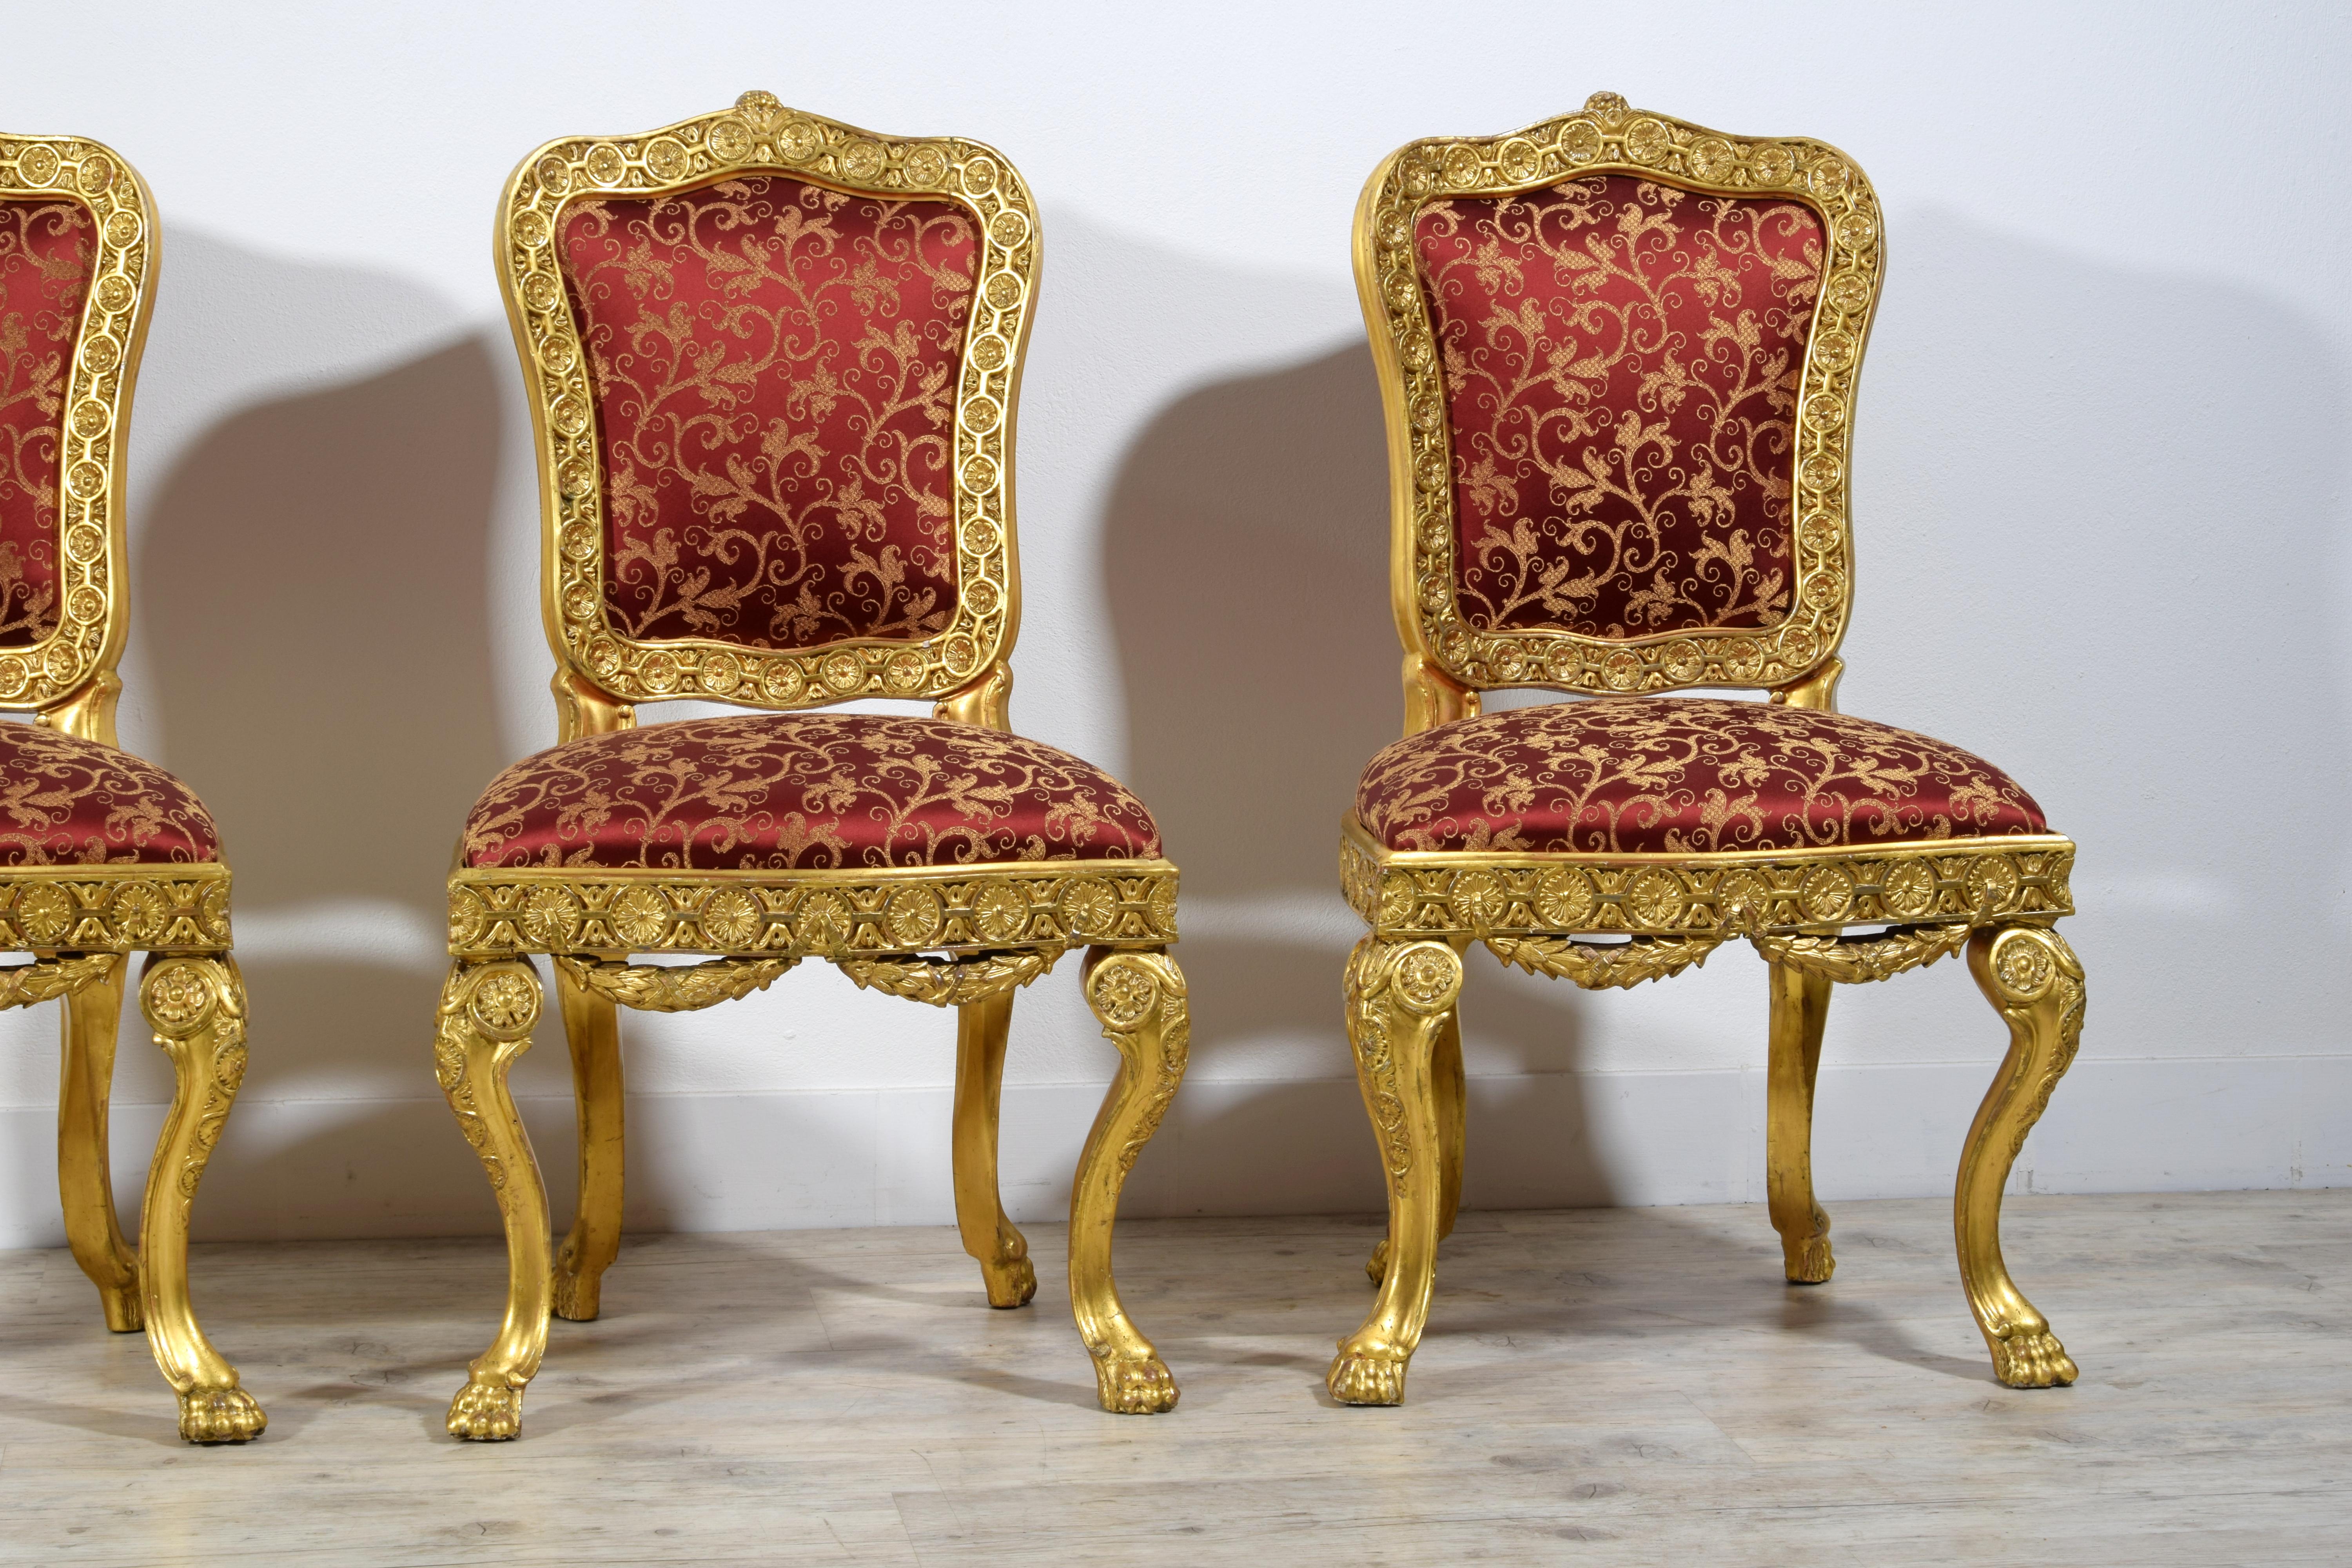 18th Century Four Italian Baroque Carved Giltwood Chairs For Sale 6